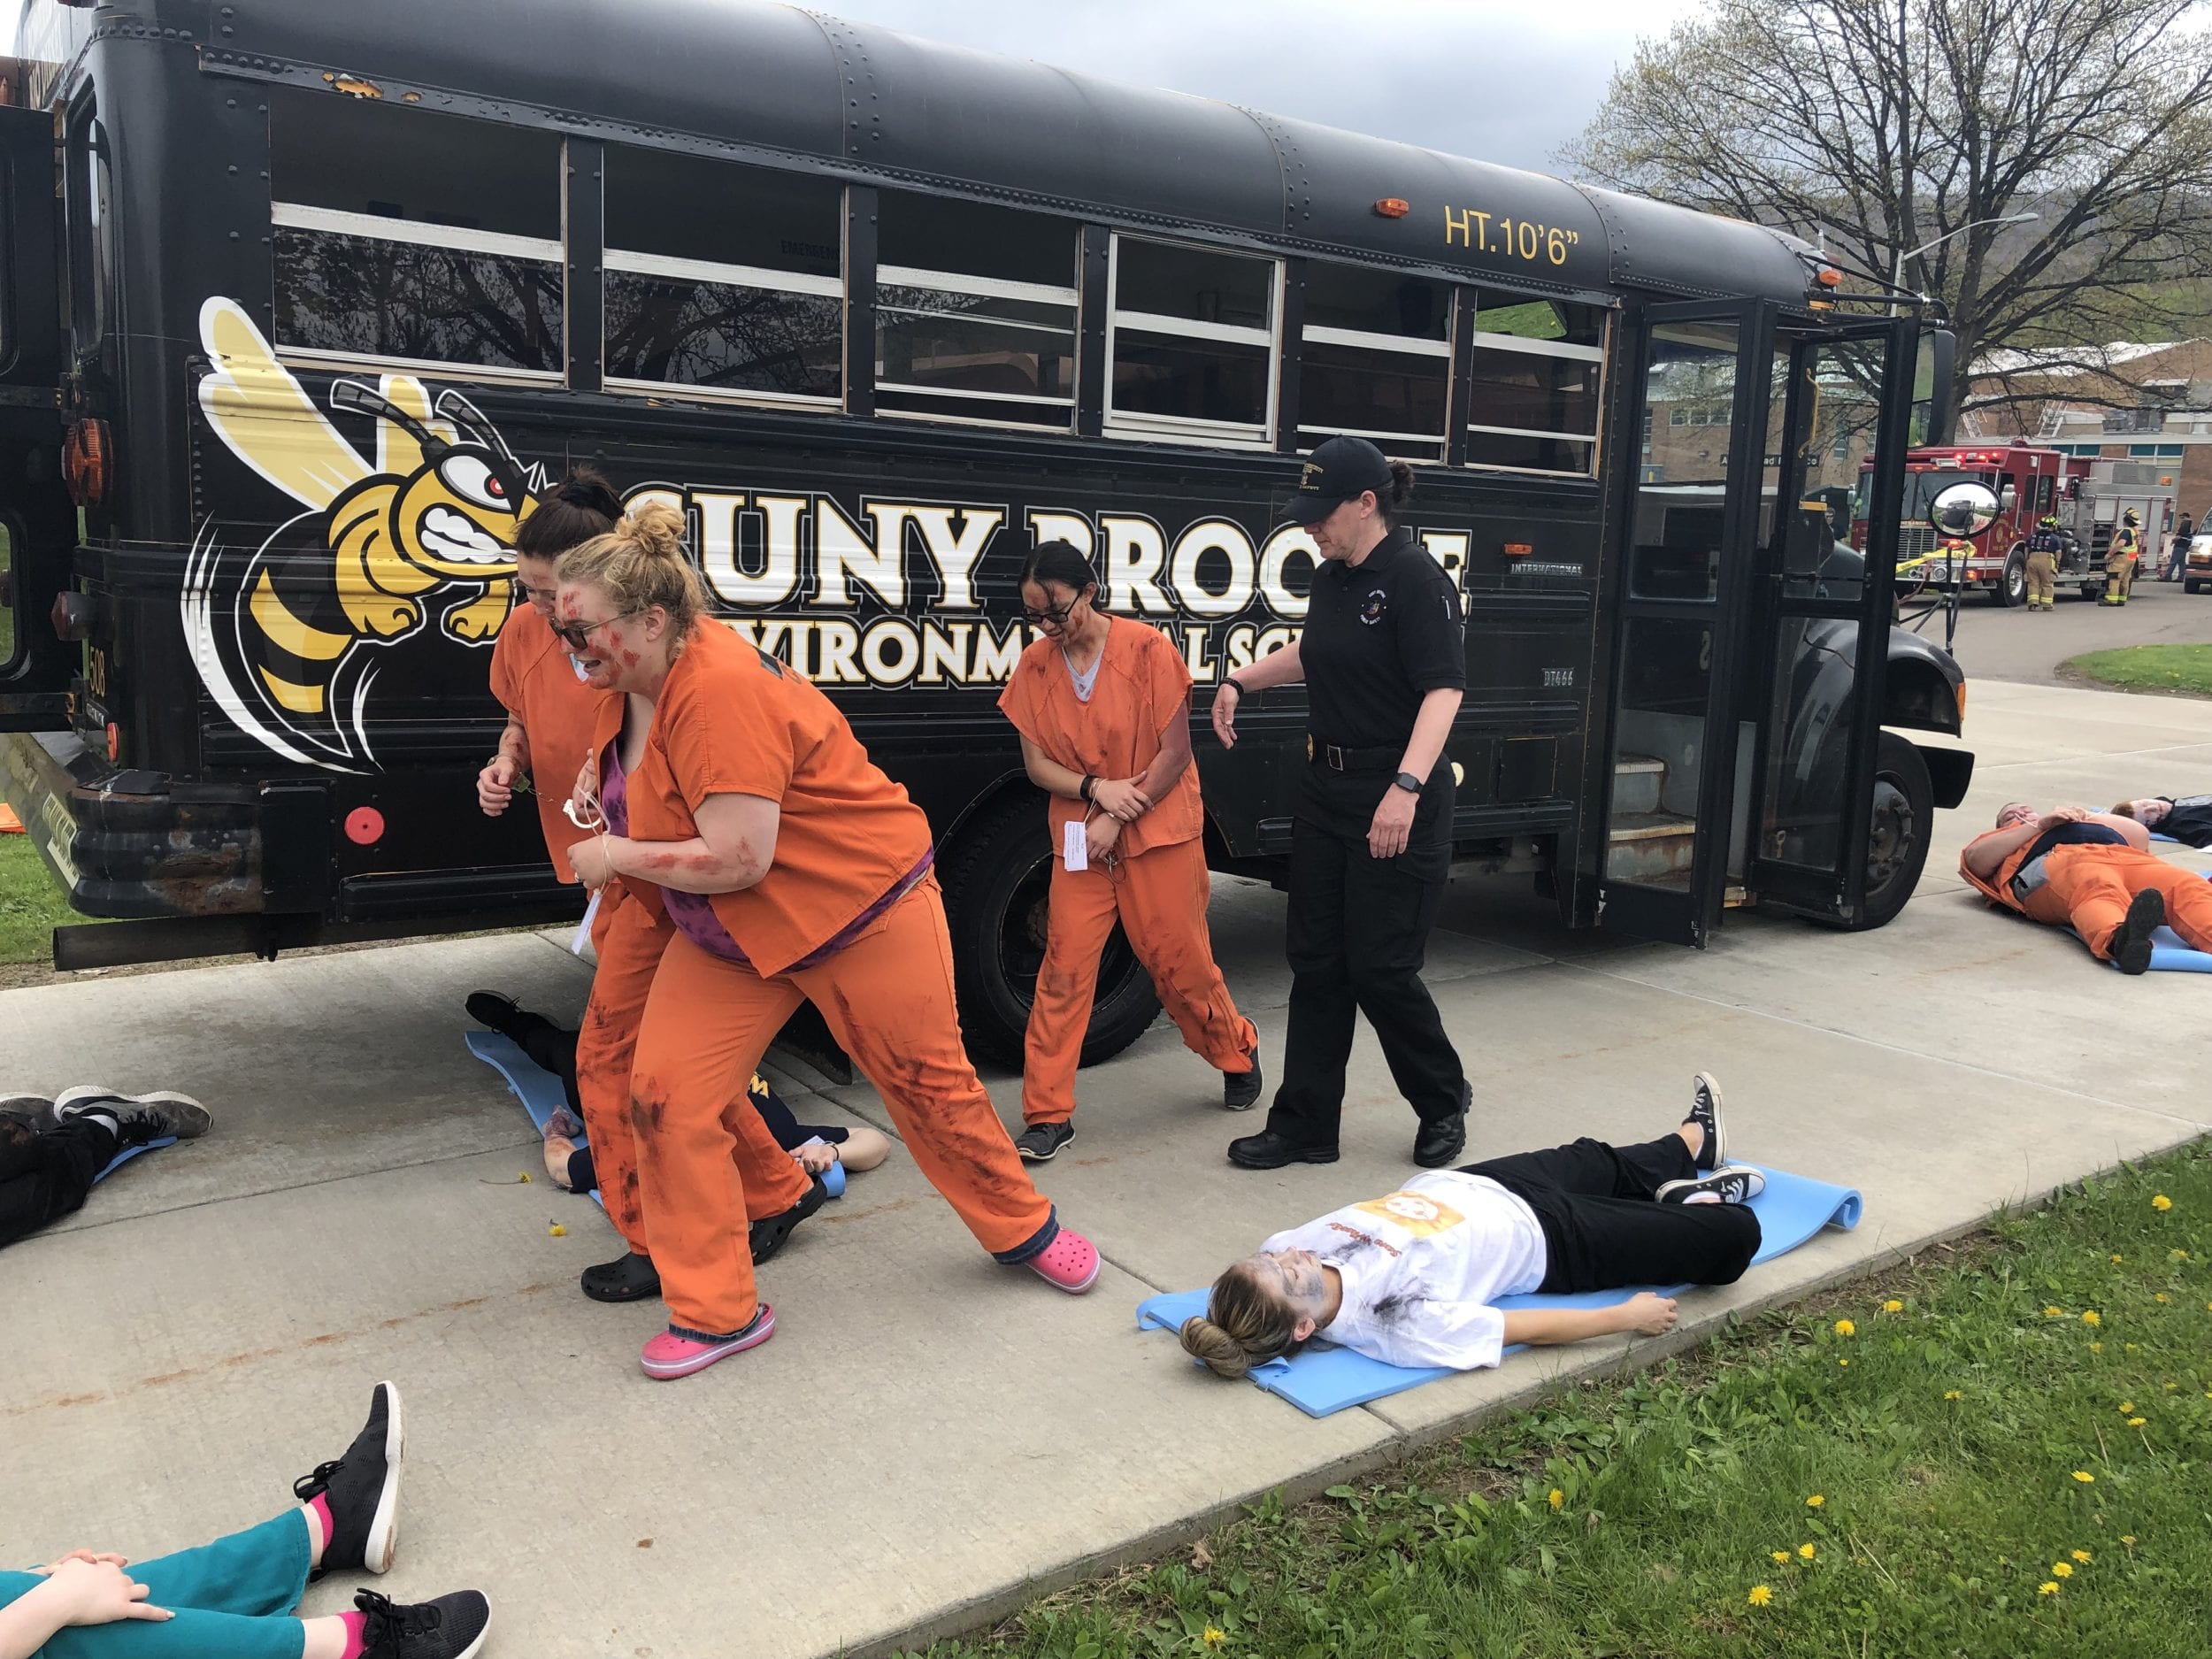 "Inmates" limp from the scene during the Mock Disaster.